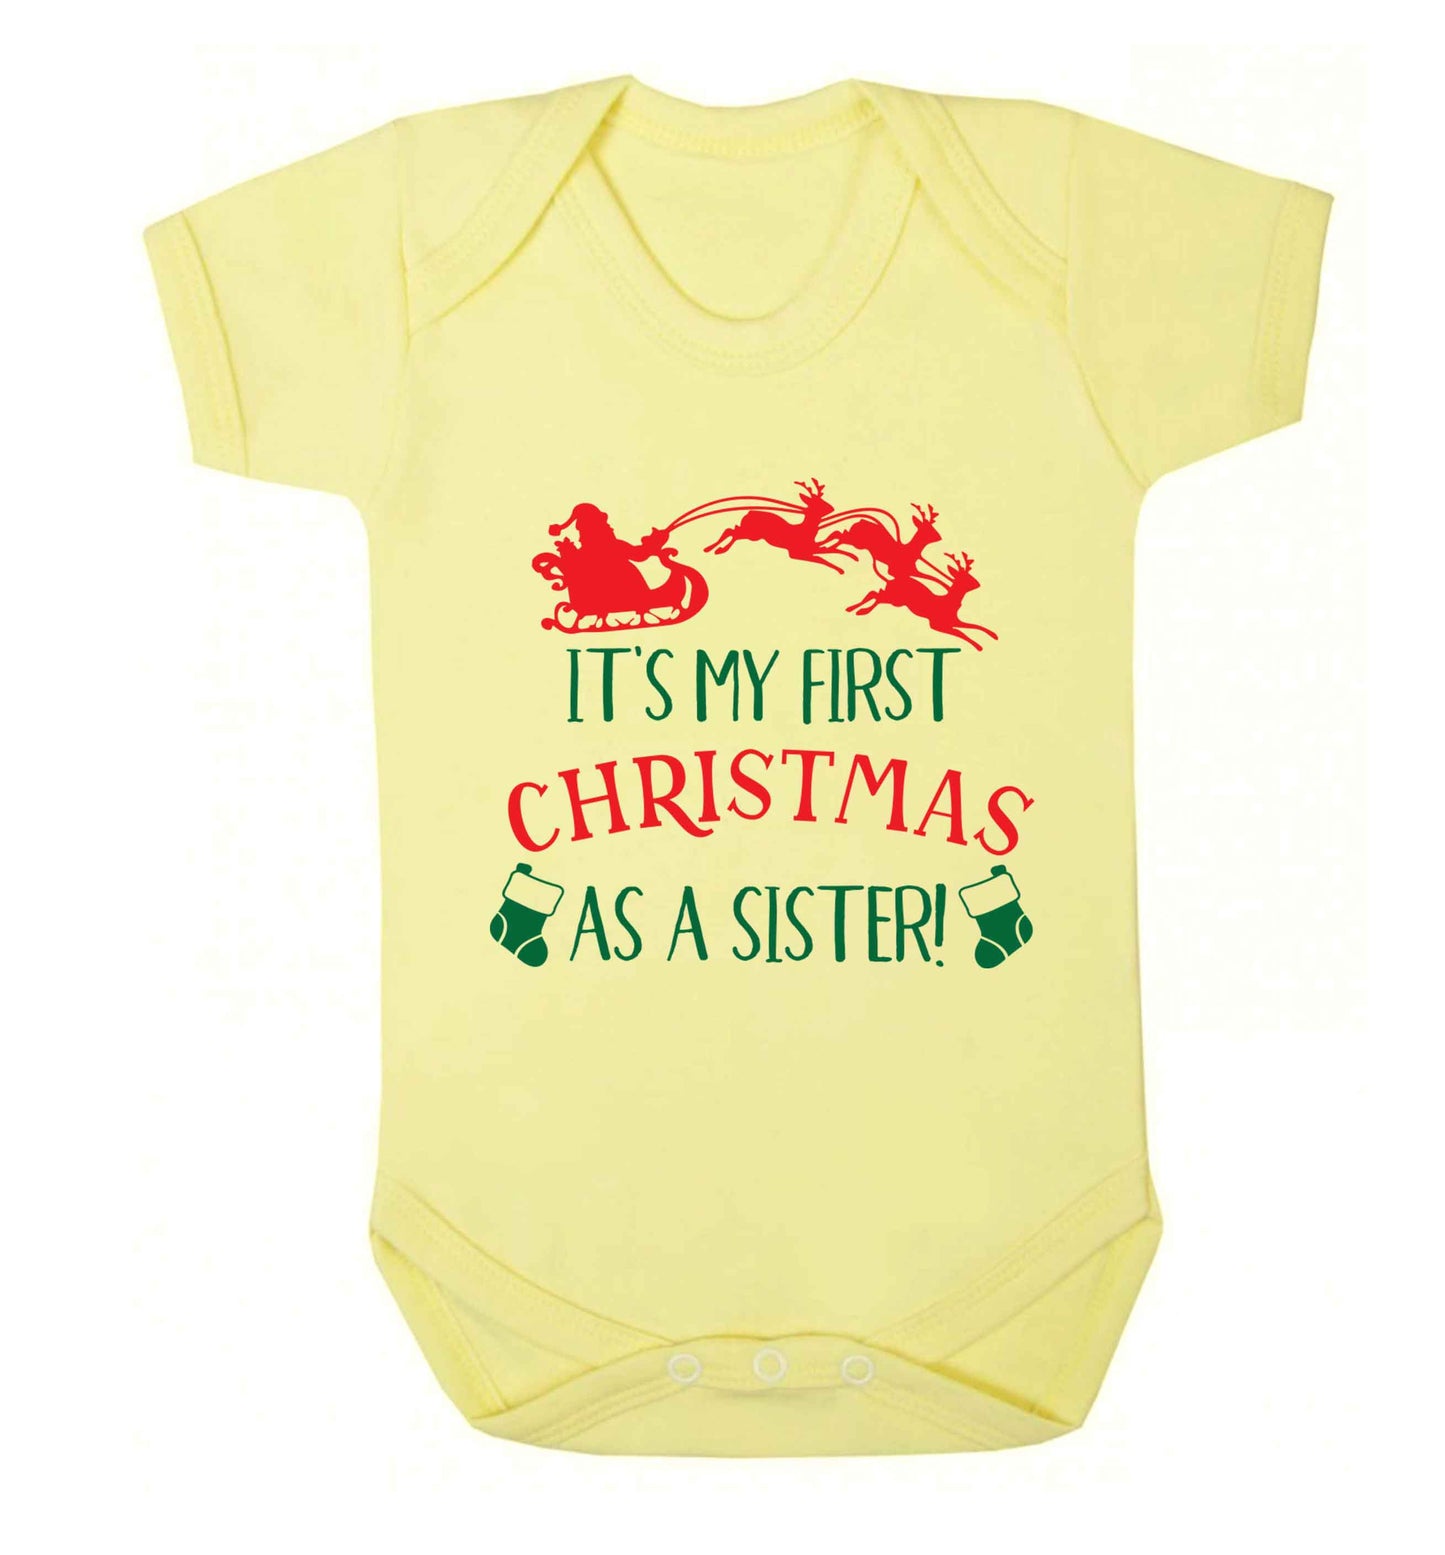 It's my first Christmas as a sister! Baby Vest pale yellow 18-24 months